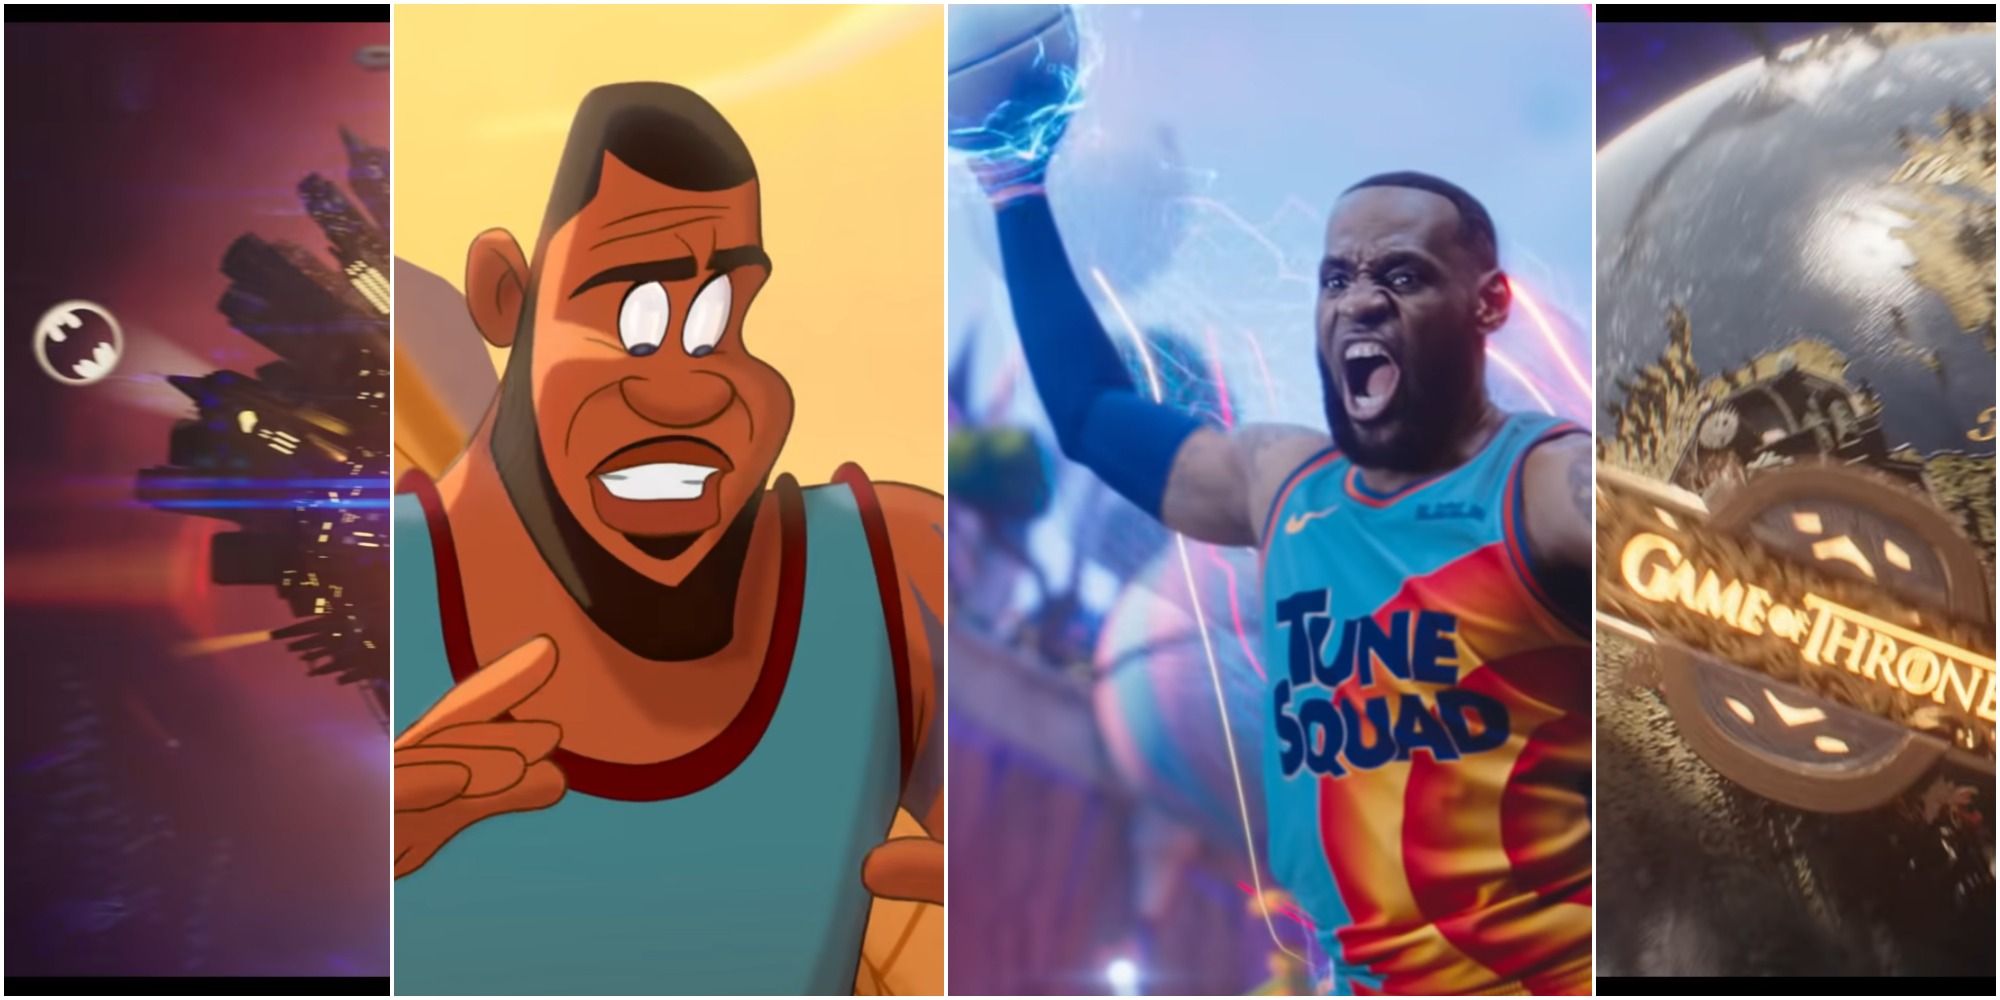 Details You Missed From Space Jam 2 Trailer